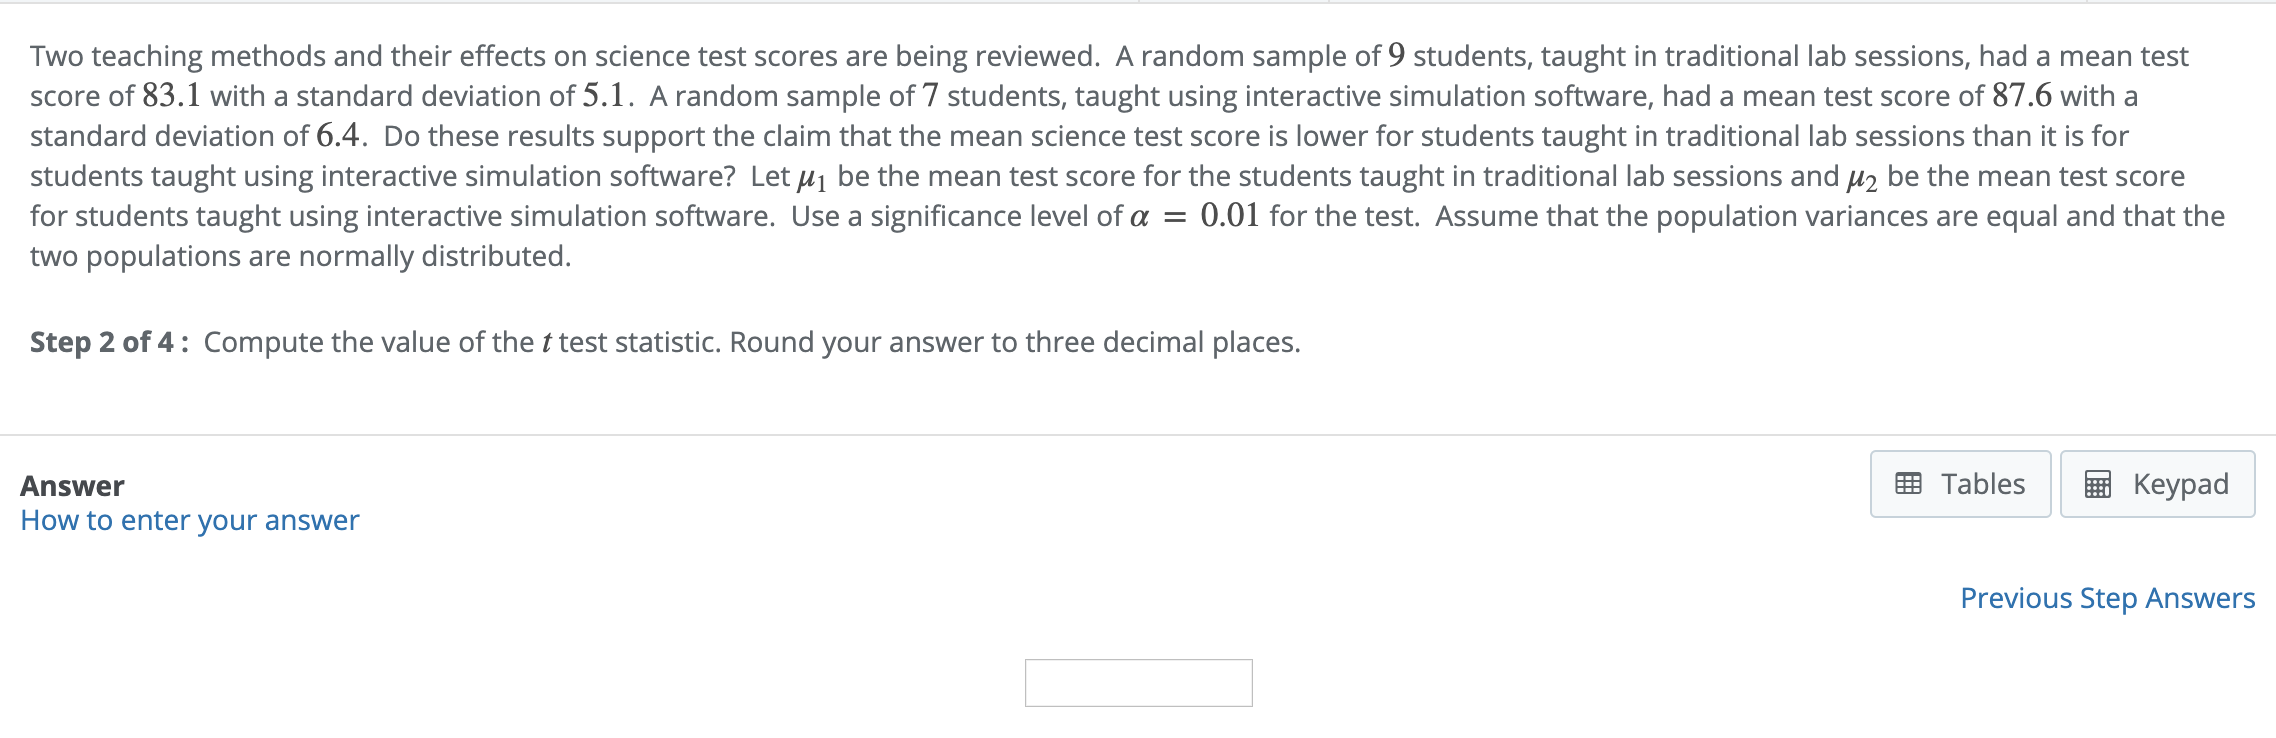 Two teaching methods and their effects on science test scores are being reviewed. A random sample of 9 students, taught in traditional lab sessions, had a mean test
score of 83.1 with a standard deviation of 5.1. A random sample of 7 students, taught using interactive simulation software, had a mean test score of 87.6 with a
standard deviation of 6.4. Do these results support the claim that the mean science test score is lower for students taught in traditional lab sessions than it is for
students taught using interactive simulation software? Let be the mean test score for the students taught in traditional lab sessions and μ2 be the mean test score
for students taught using interactive simulation software. Use a significance level of α = 0.01 for the test. Assume that the population variances are equal and that the
two populations are normally distributed.
Step 2 of 4: Compute the value of the t test statistic. Round your answer to three decimal places
EB TablesKeypad
Answer
How to enter your answer
Previous Step Answers
